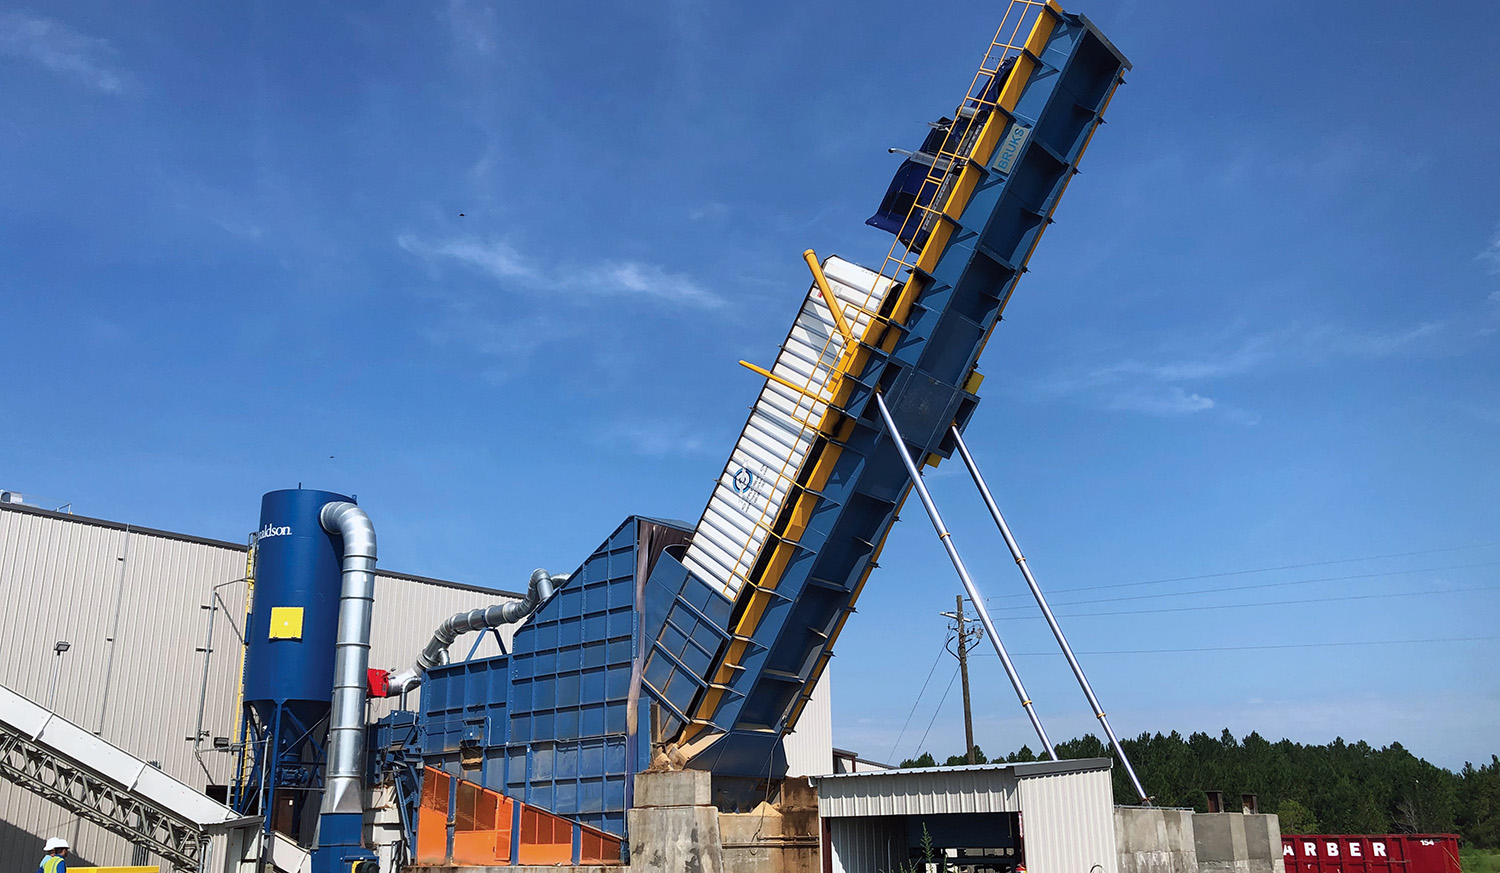 Bruks Siwertell back-in truck dump with receiving hopper and dust collector